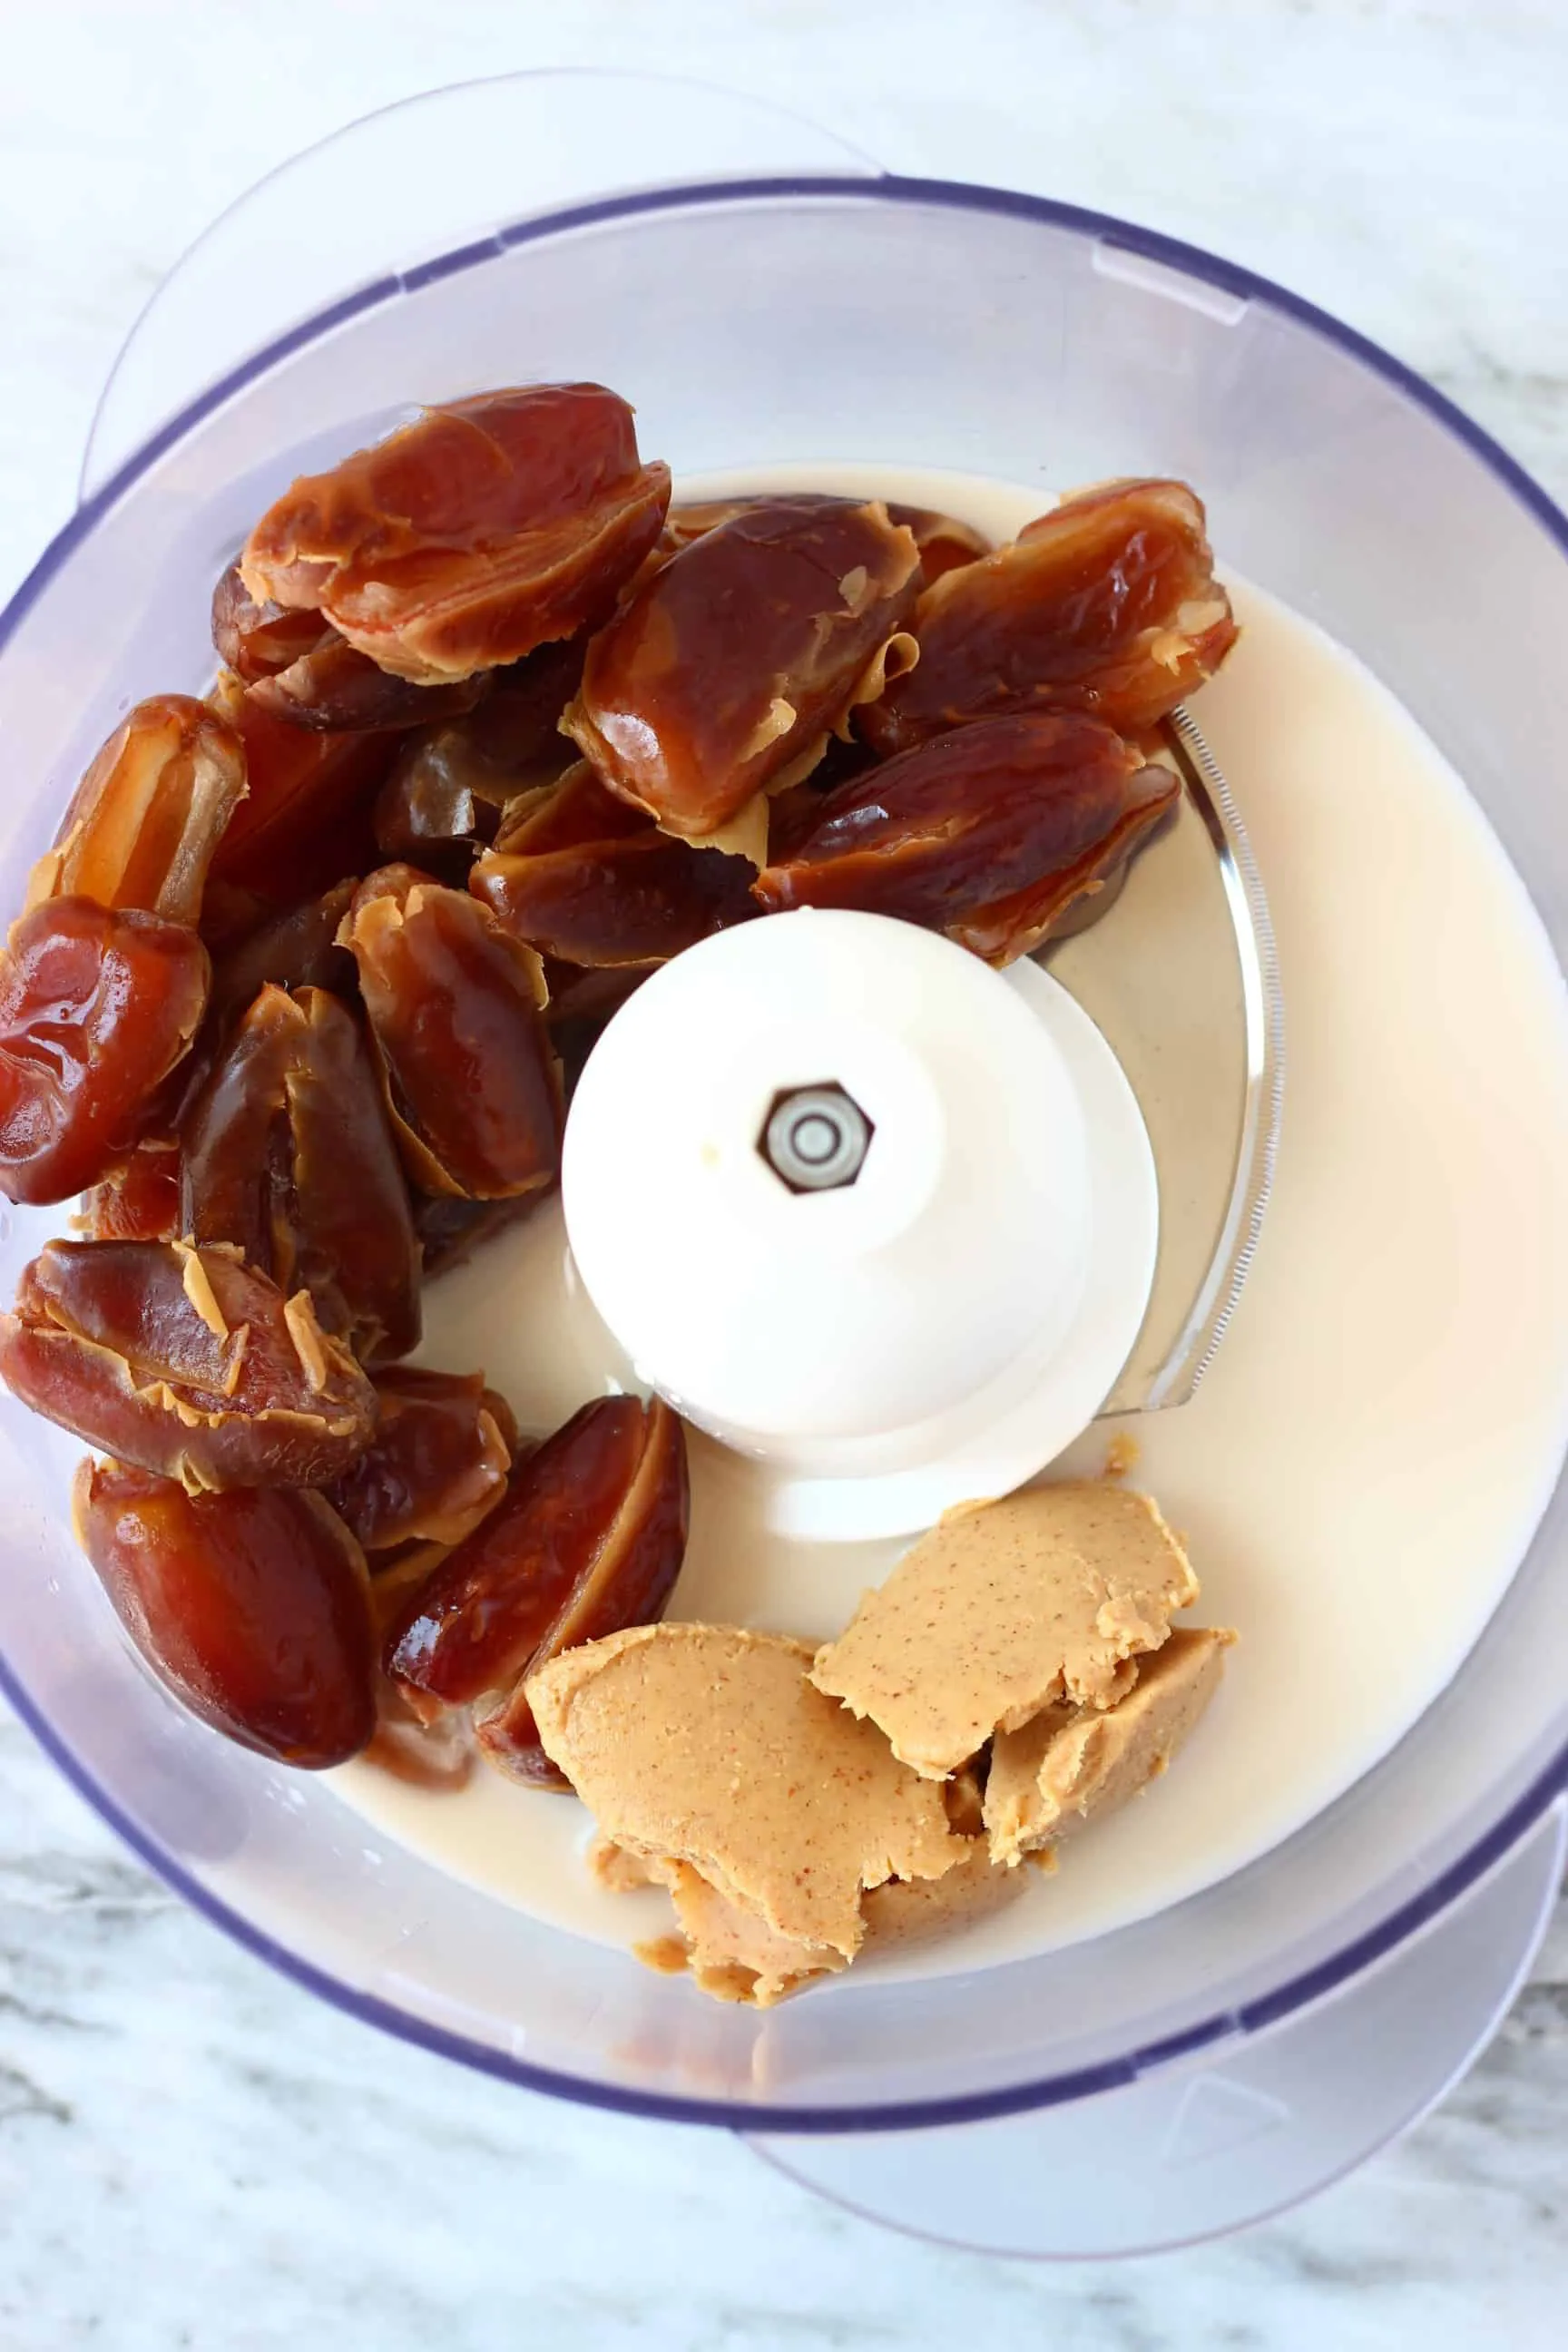 Dates, almond butter and almond milk in a food processor against a marble background